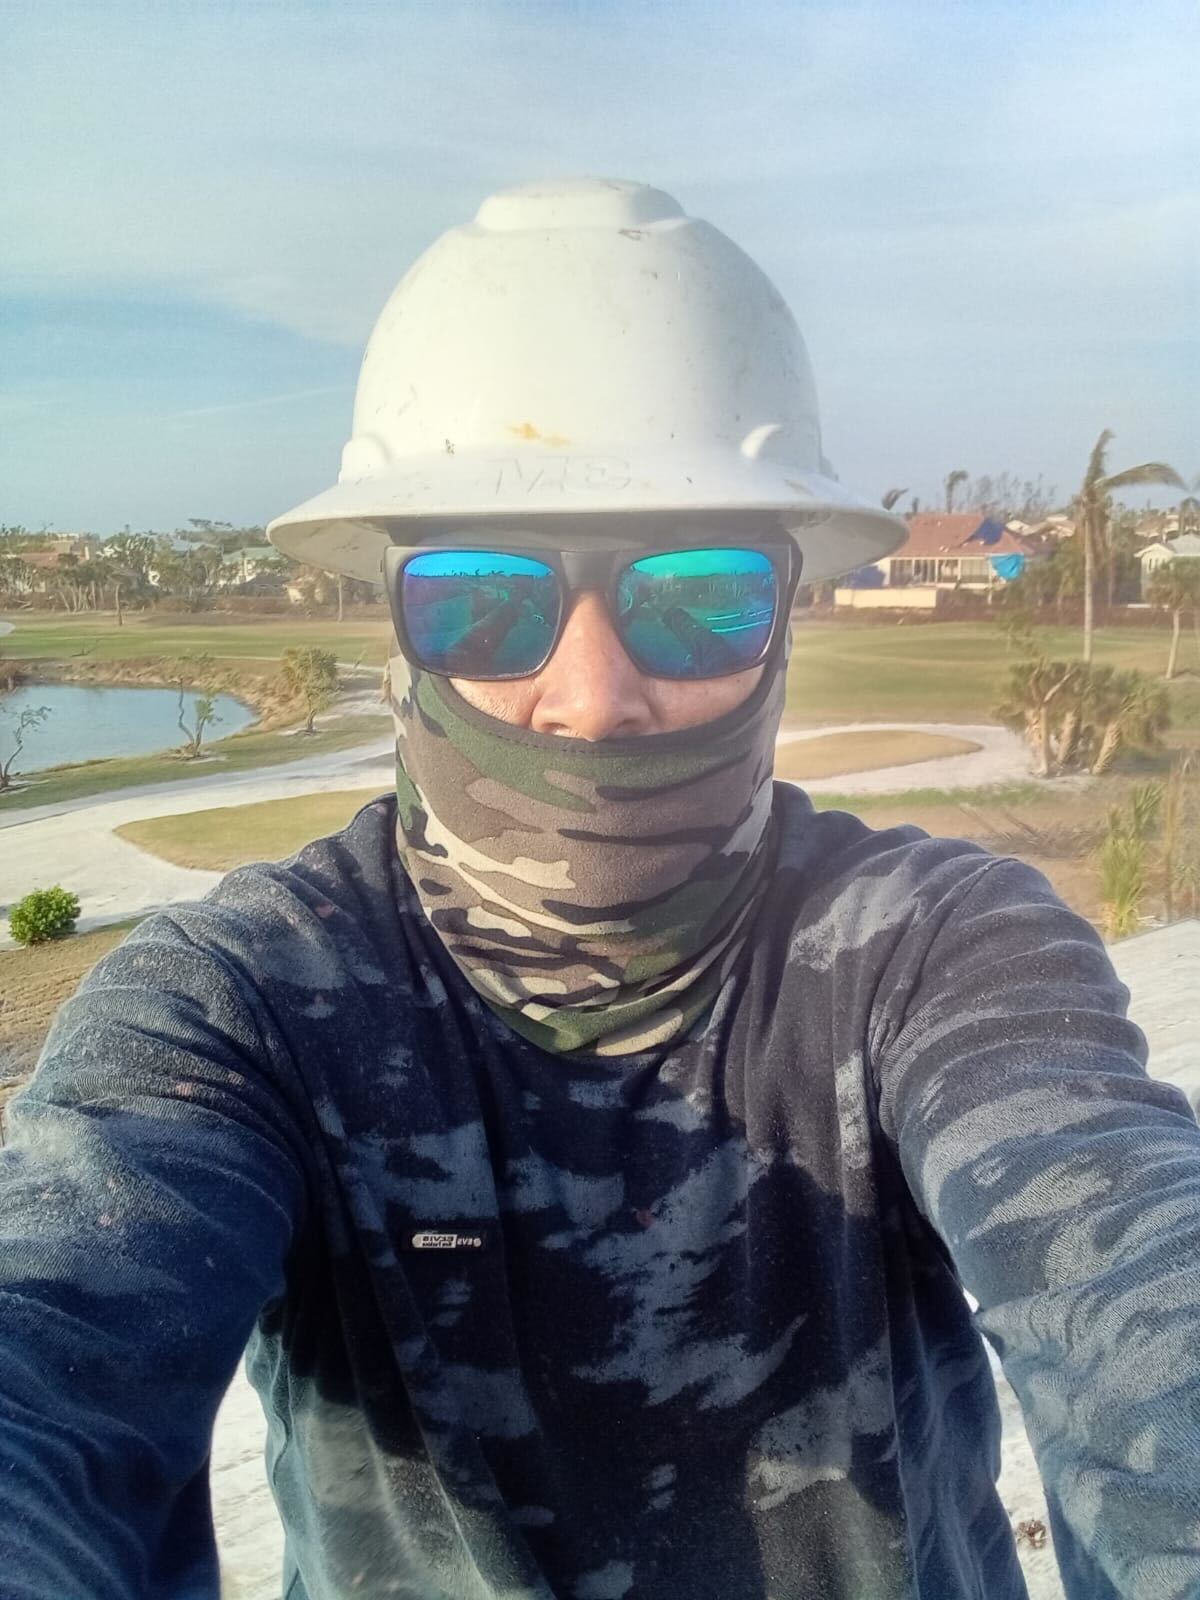 Marcos, a disaster restoration worker in Florida, poses for a selfie at work. He is wearing a white hardhat, sunglasses and a camouflage-print face covering and matching camouflage long-sleeve shirt. (Courtesy of Marcos.)